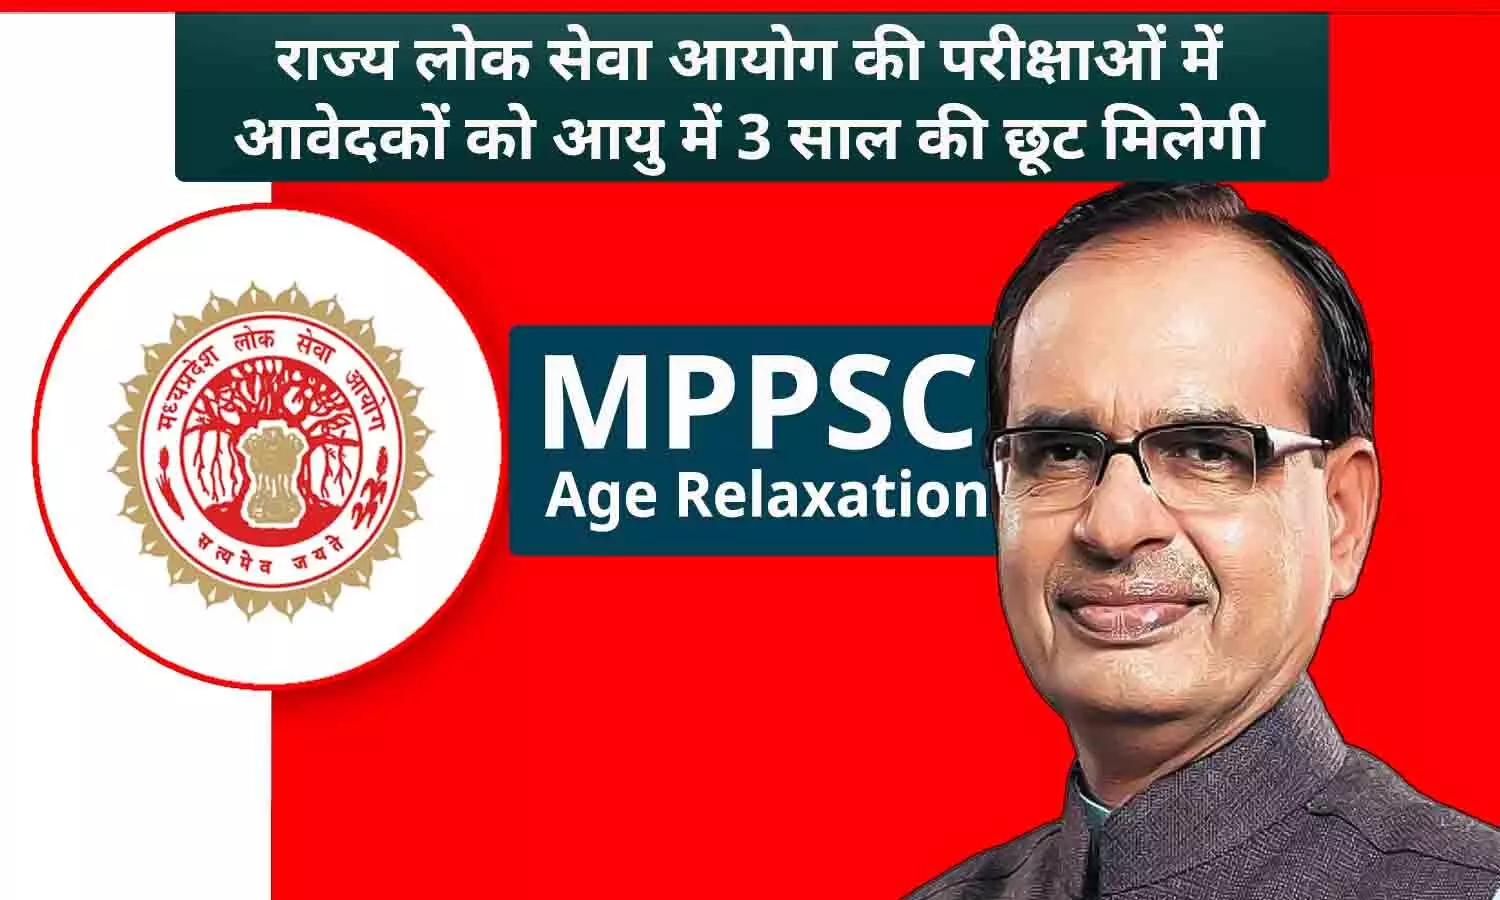 MPPSC Age Relaxation